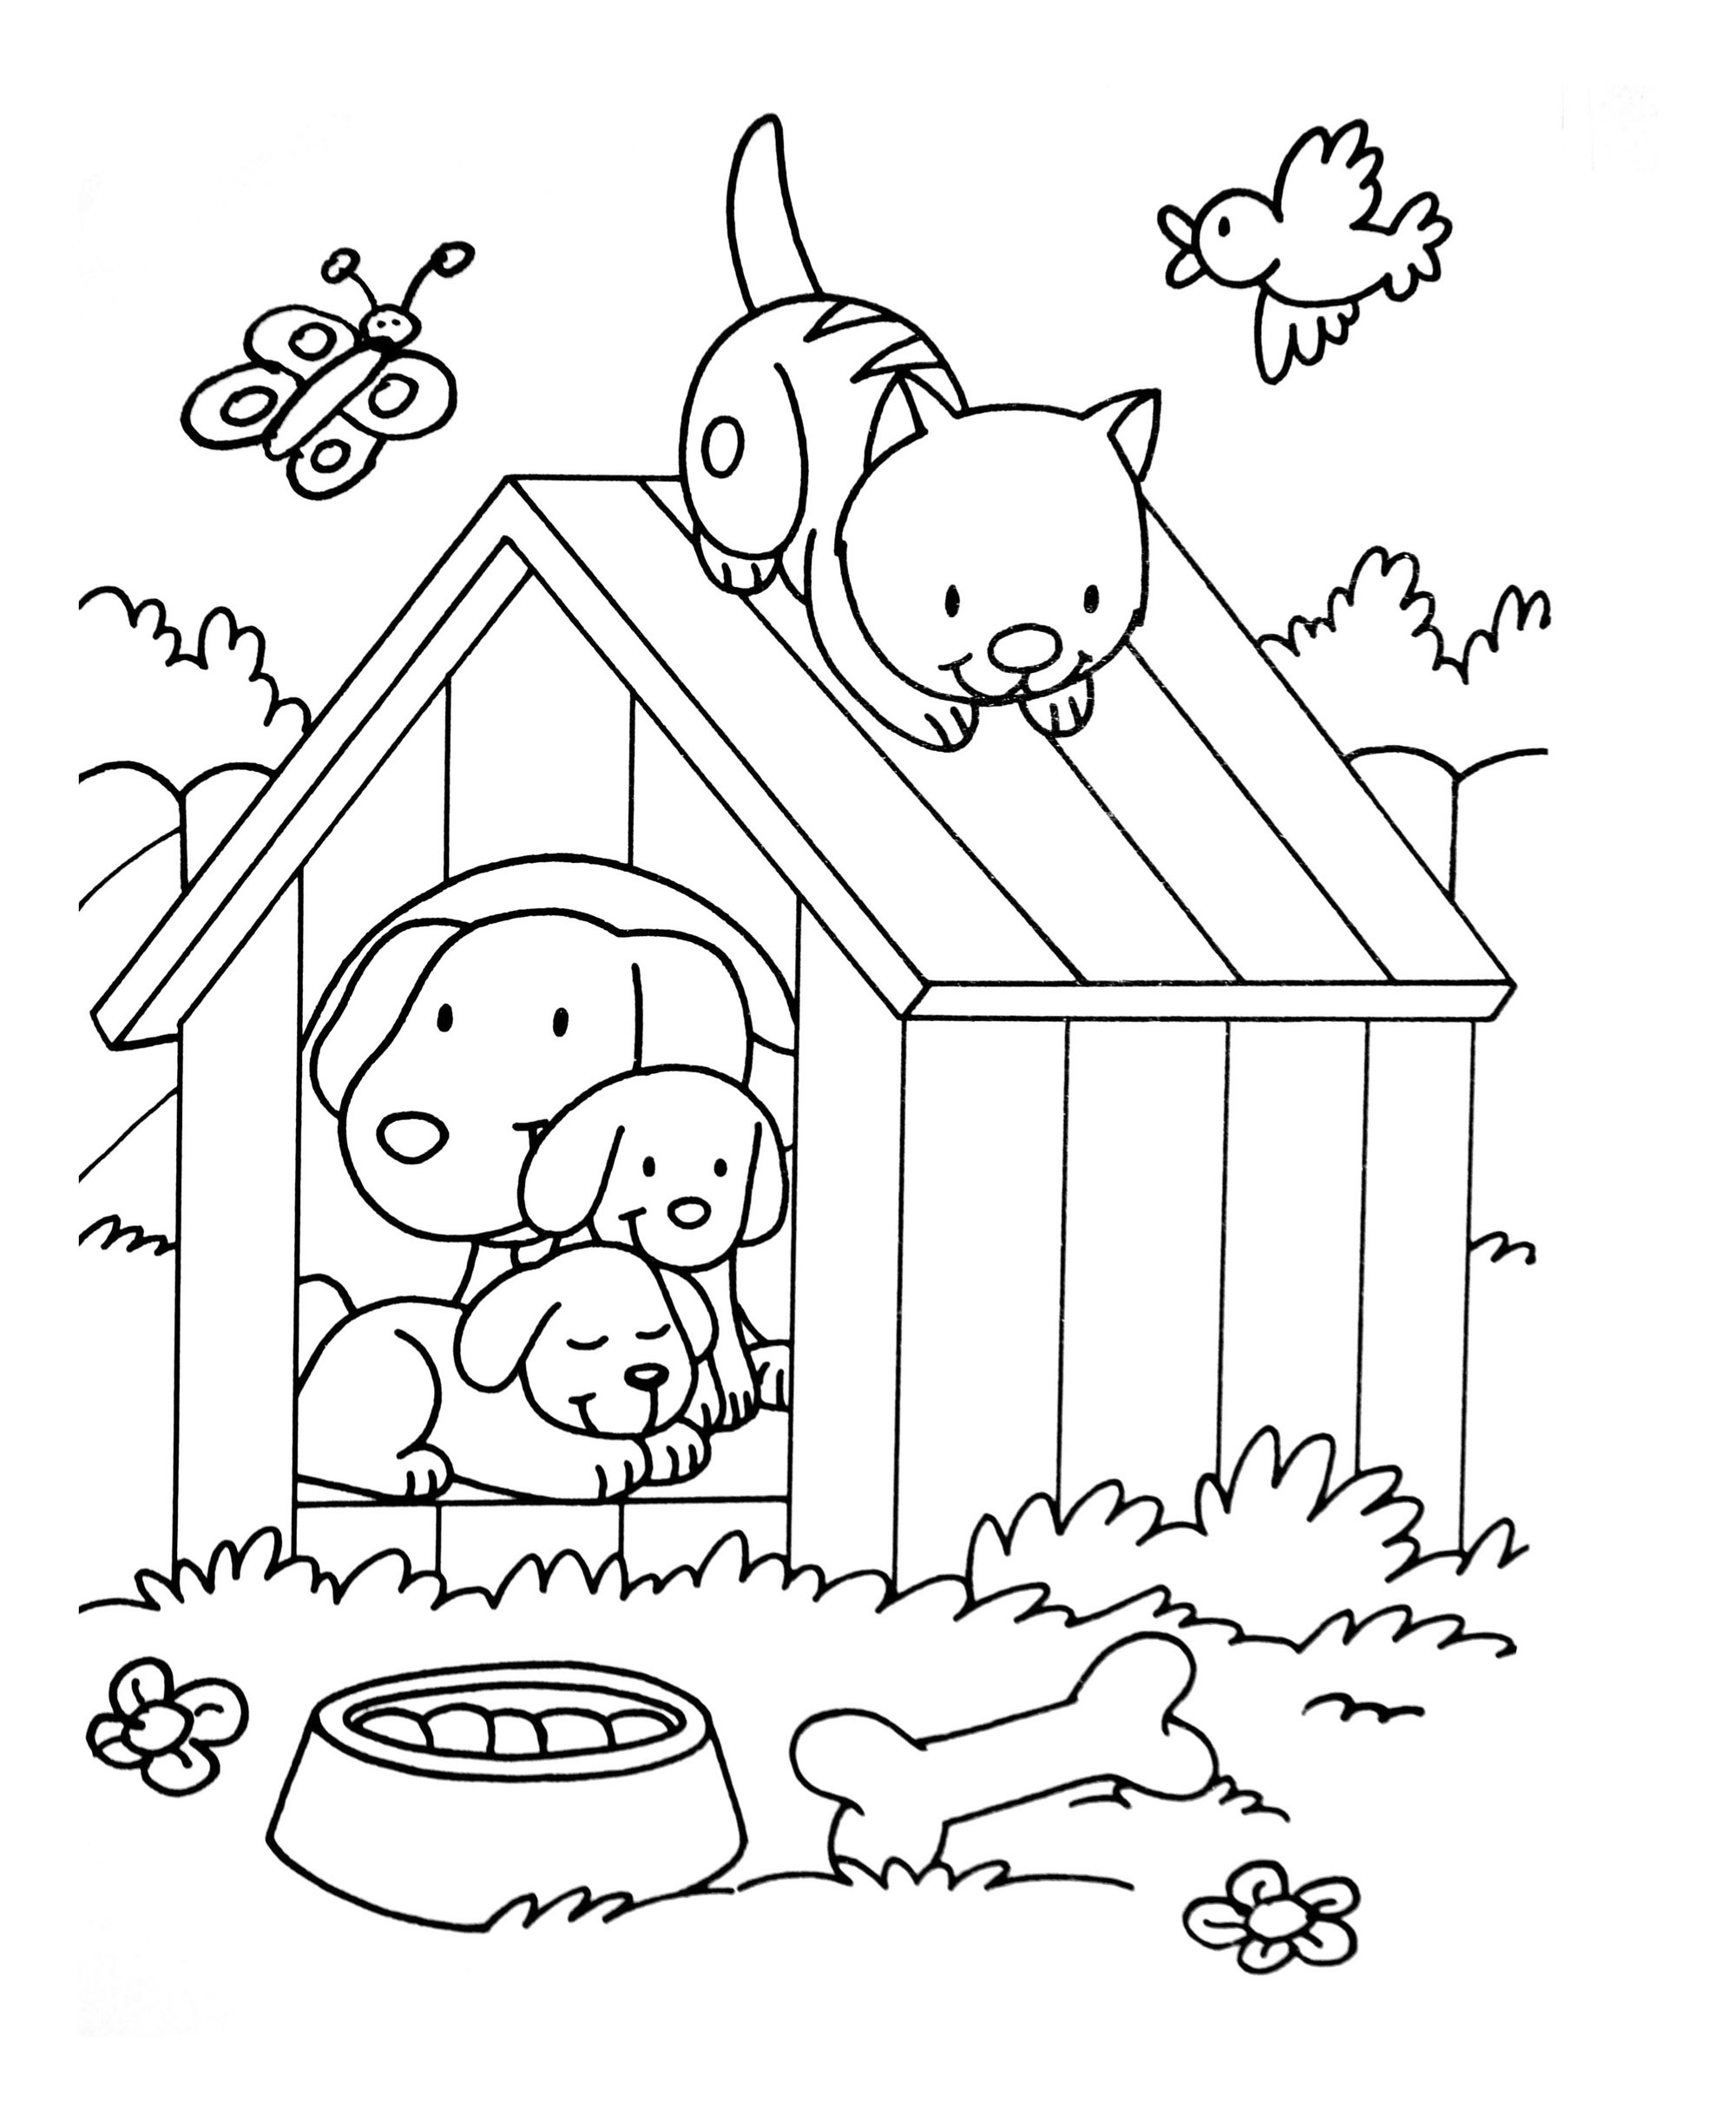 Dogs for children  Dogs & cats playing   Dogs Kids Coloring Pages